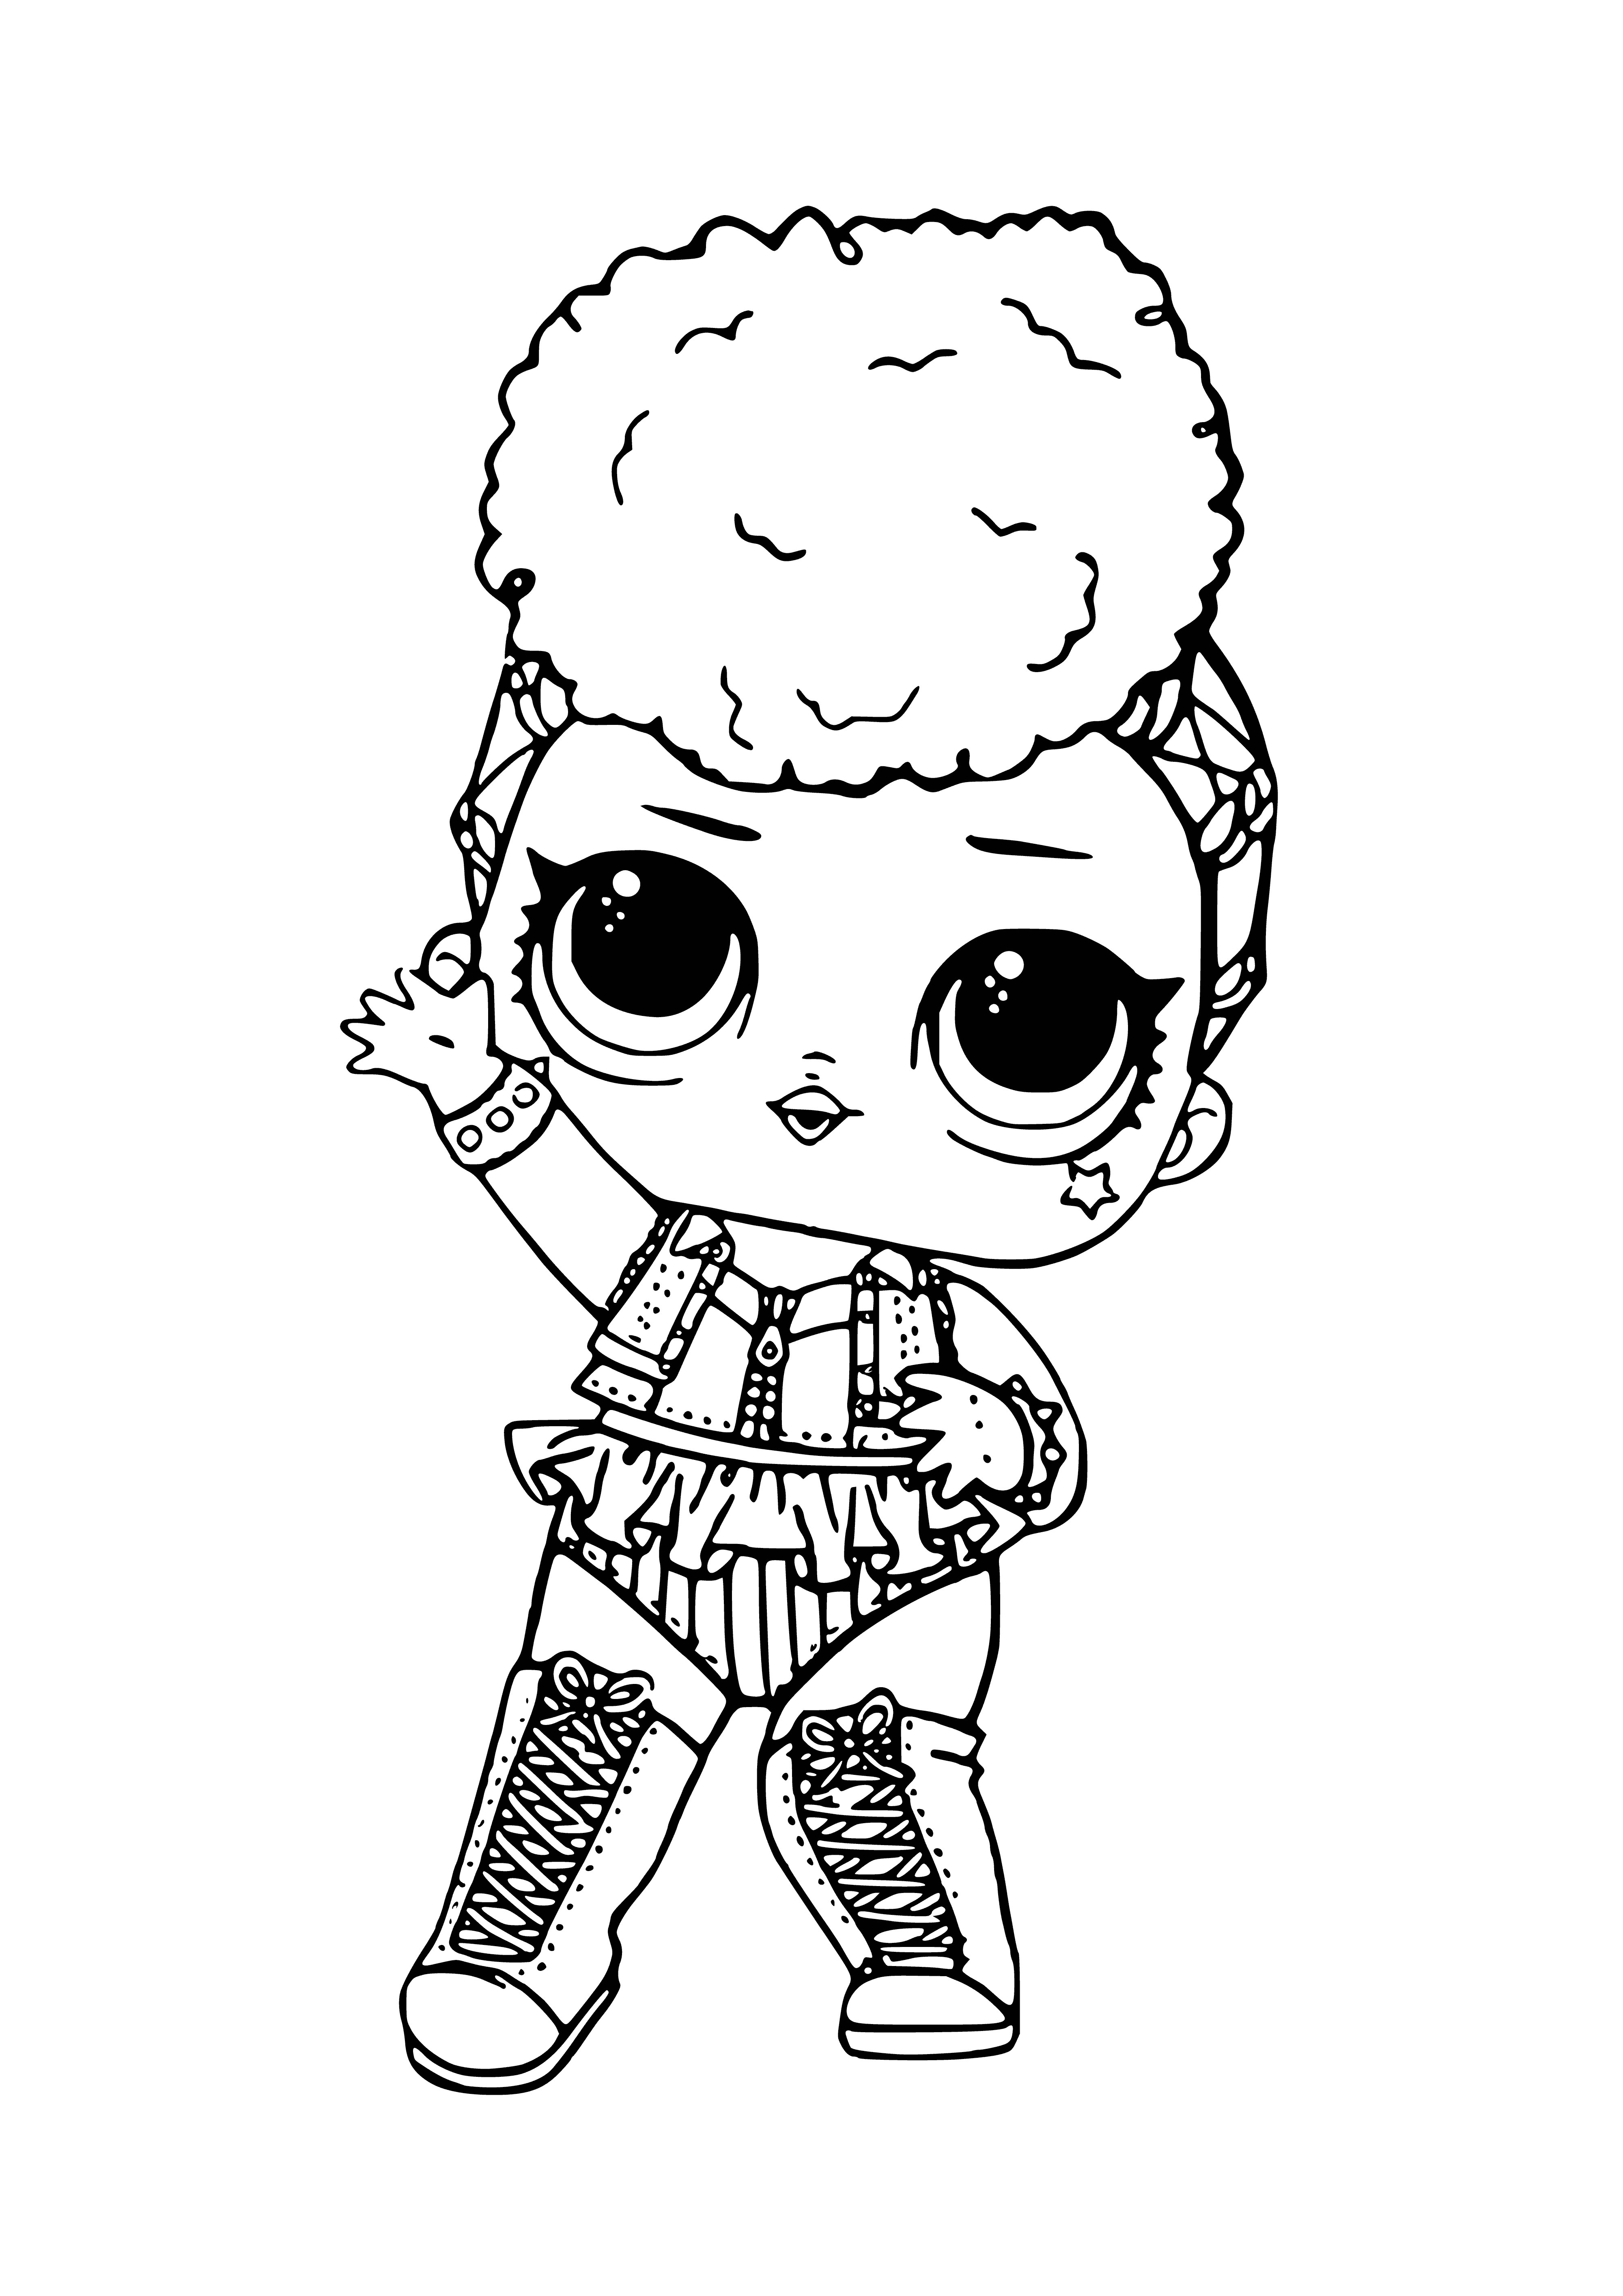 coloring page: Color page of pink toy with white crown and gold "Queen" written on front, surrounded by purple & gold stars. #LOL #ConfettiPop